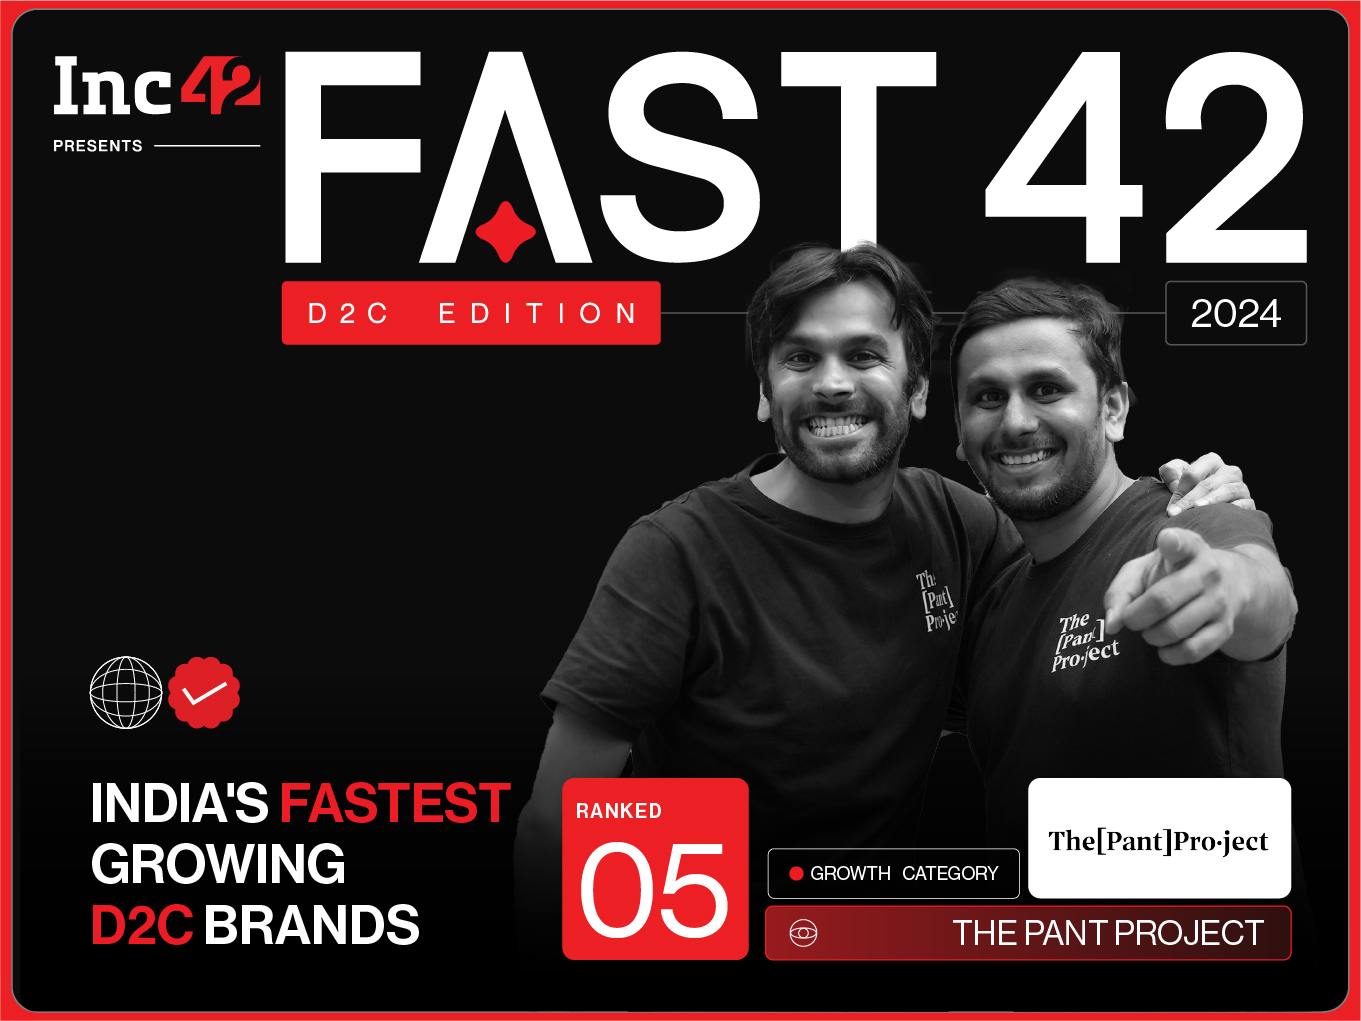 The Pant Project Has Ranked 4th On Inc42's Fast42 D2C Edition 2023